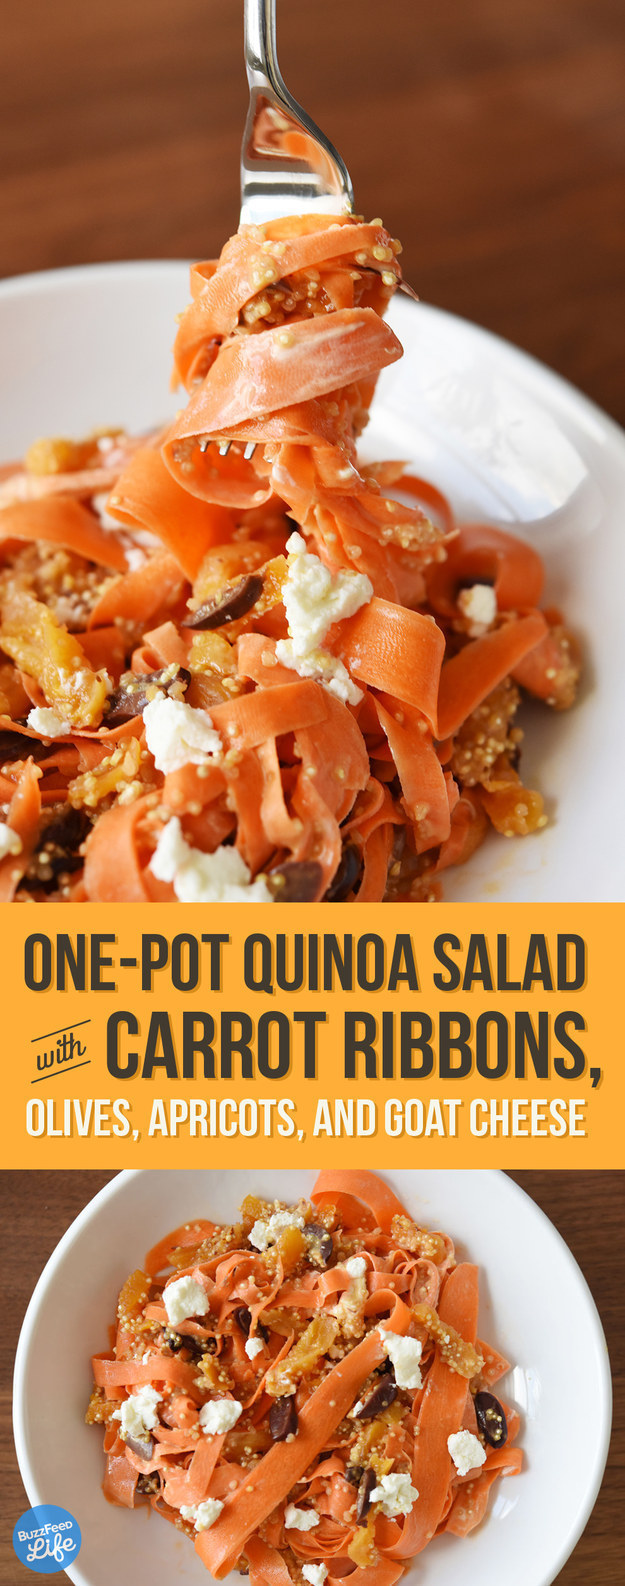 Here's A Quick Carrot-Quinoa Salad You'll Want To Eat Every Day